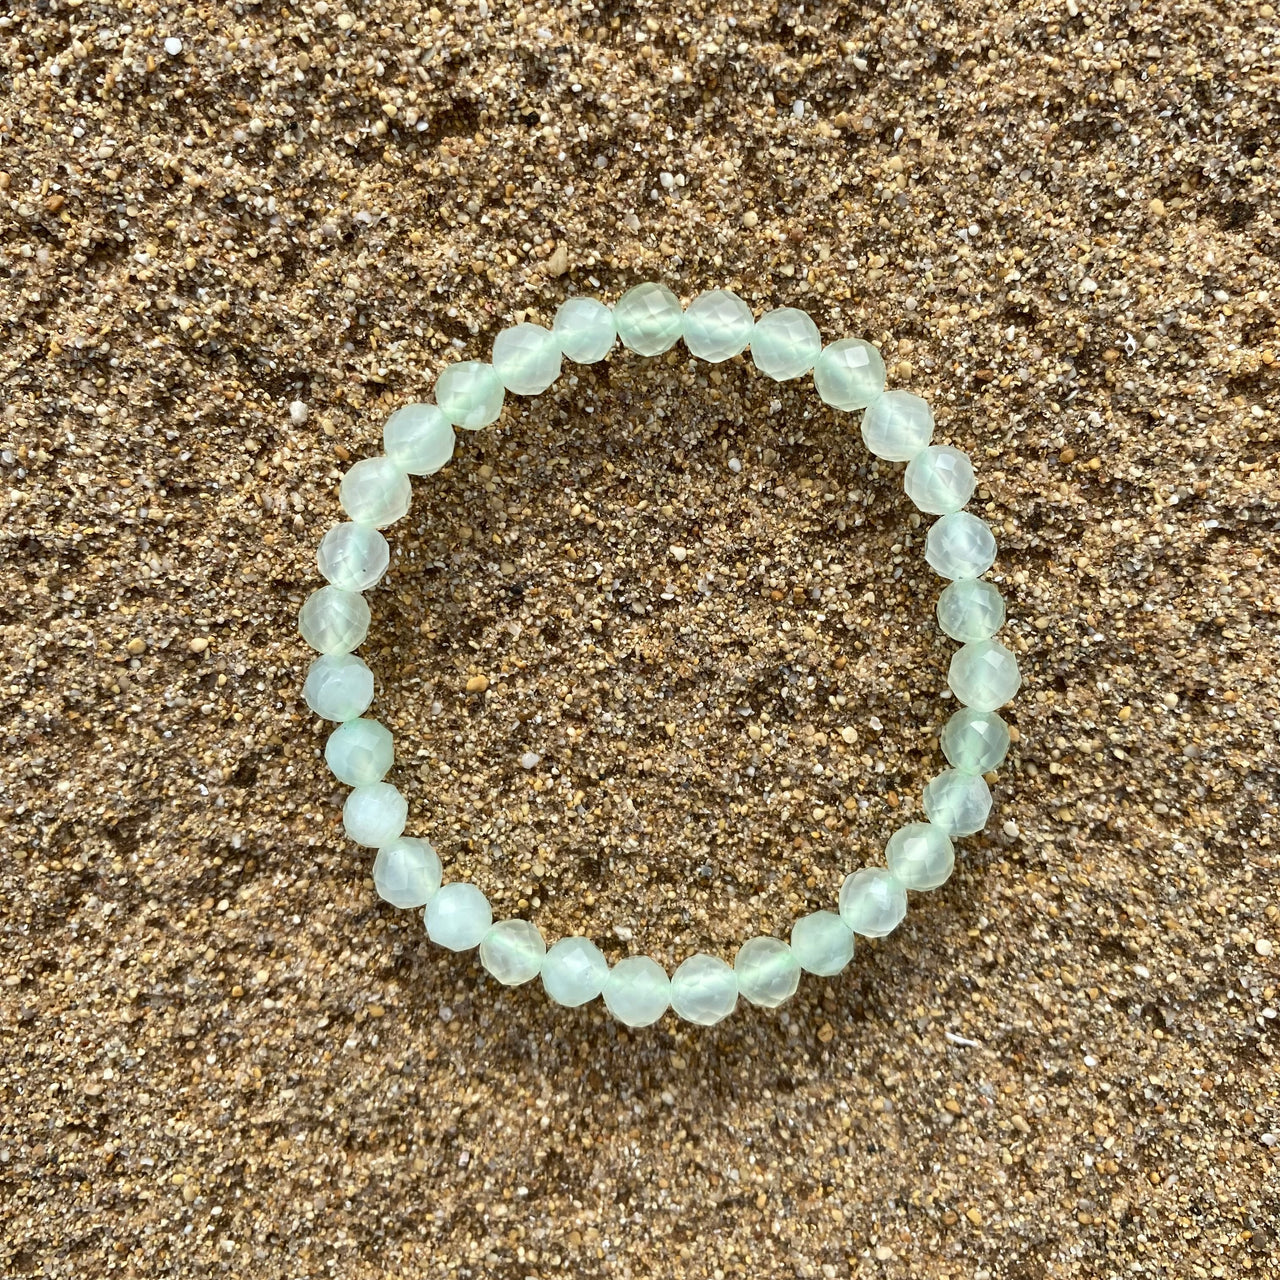 CHINA JADE BRACELET - 6MM FACETTED BEADS